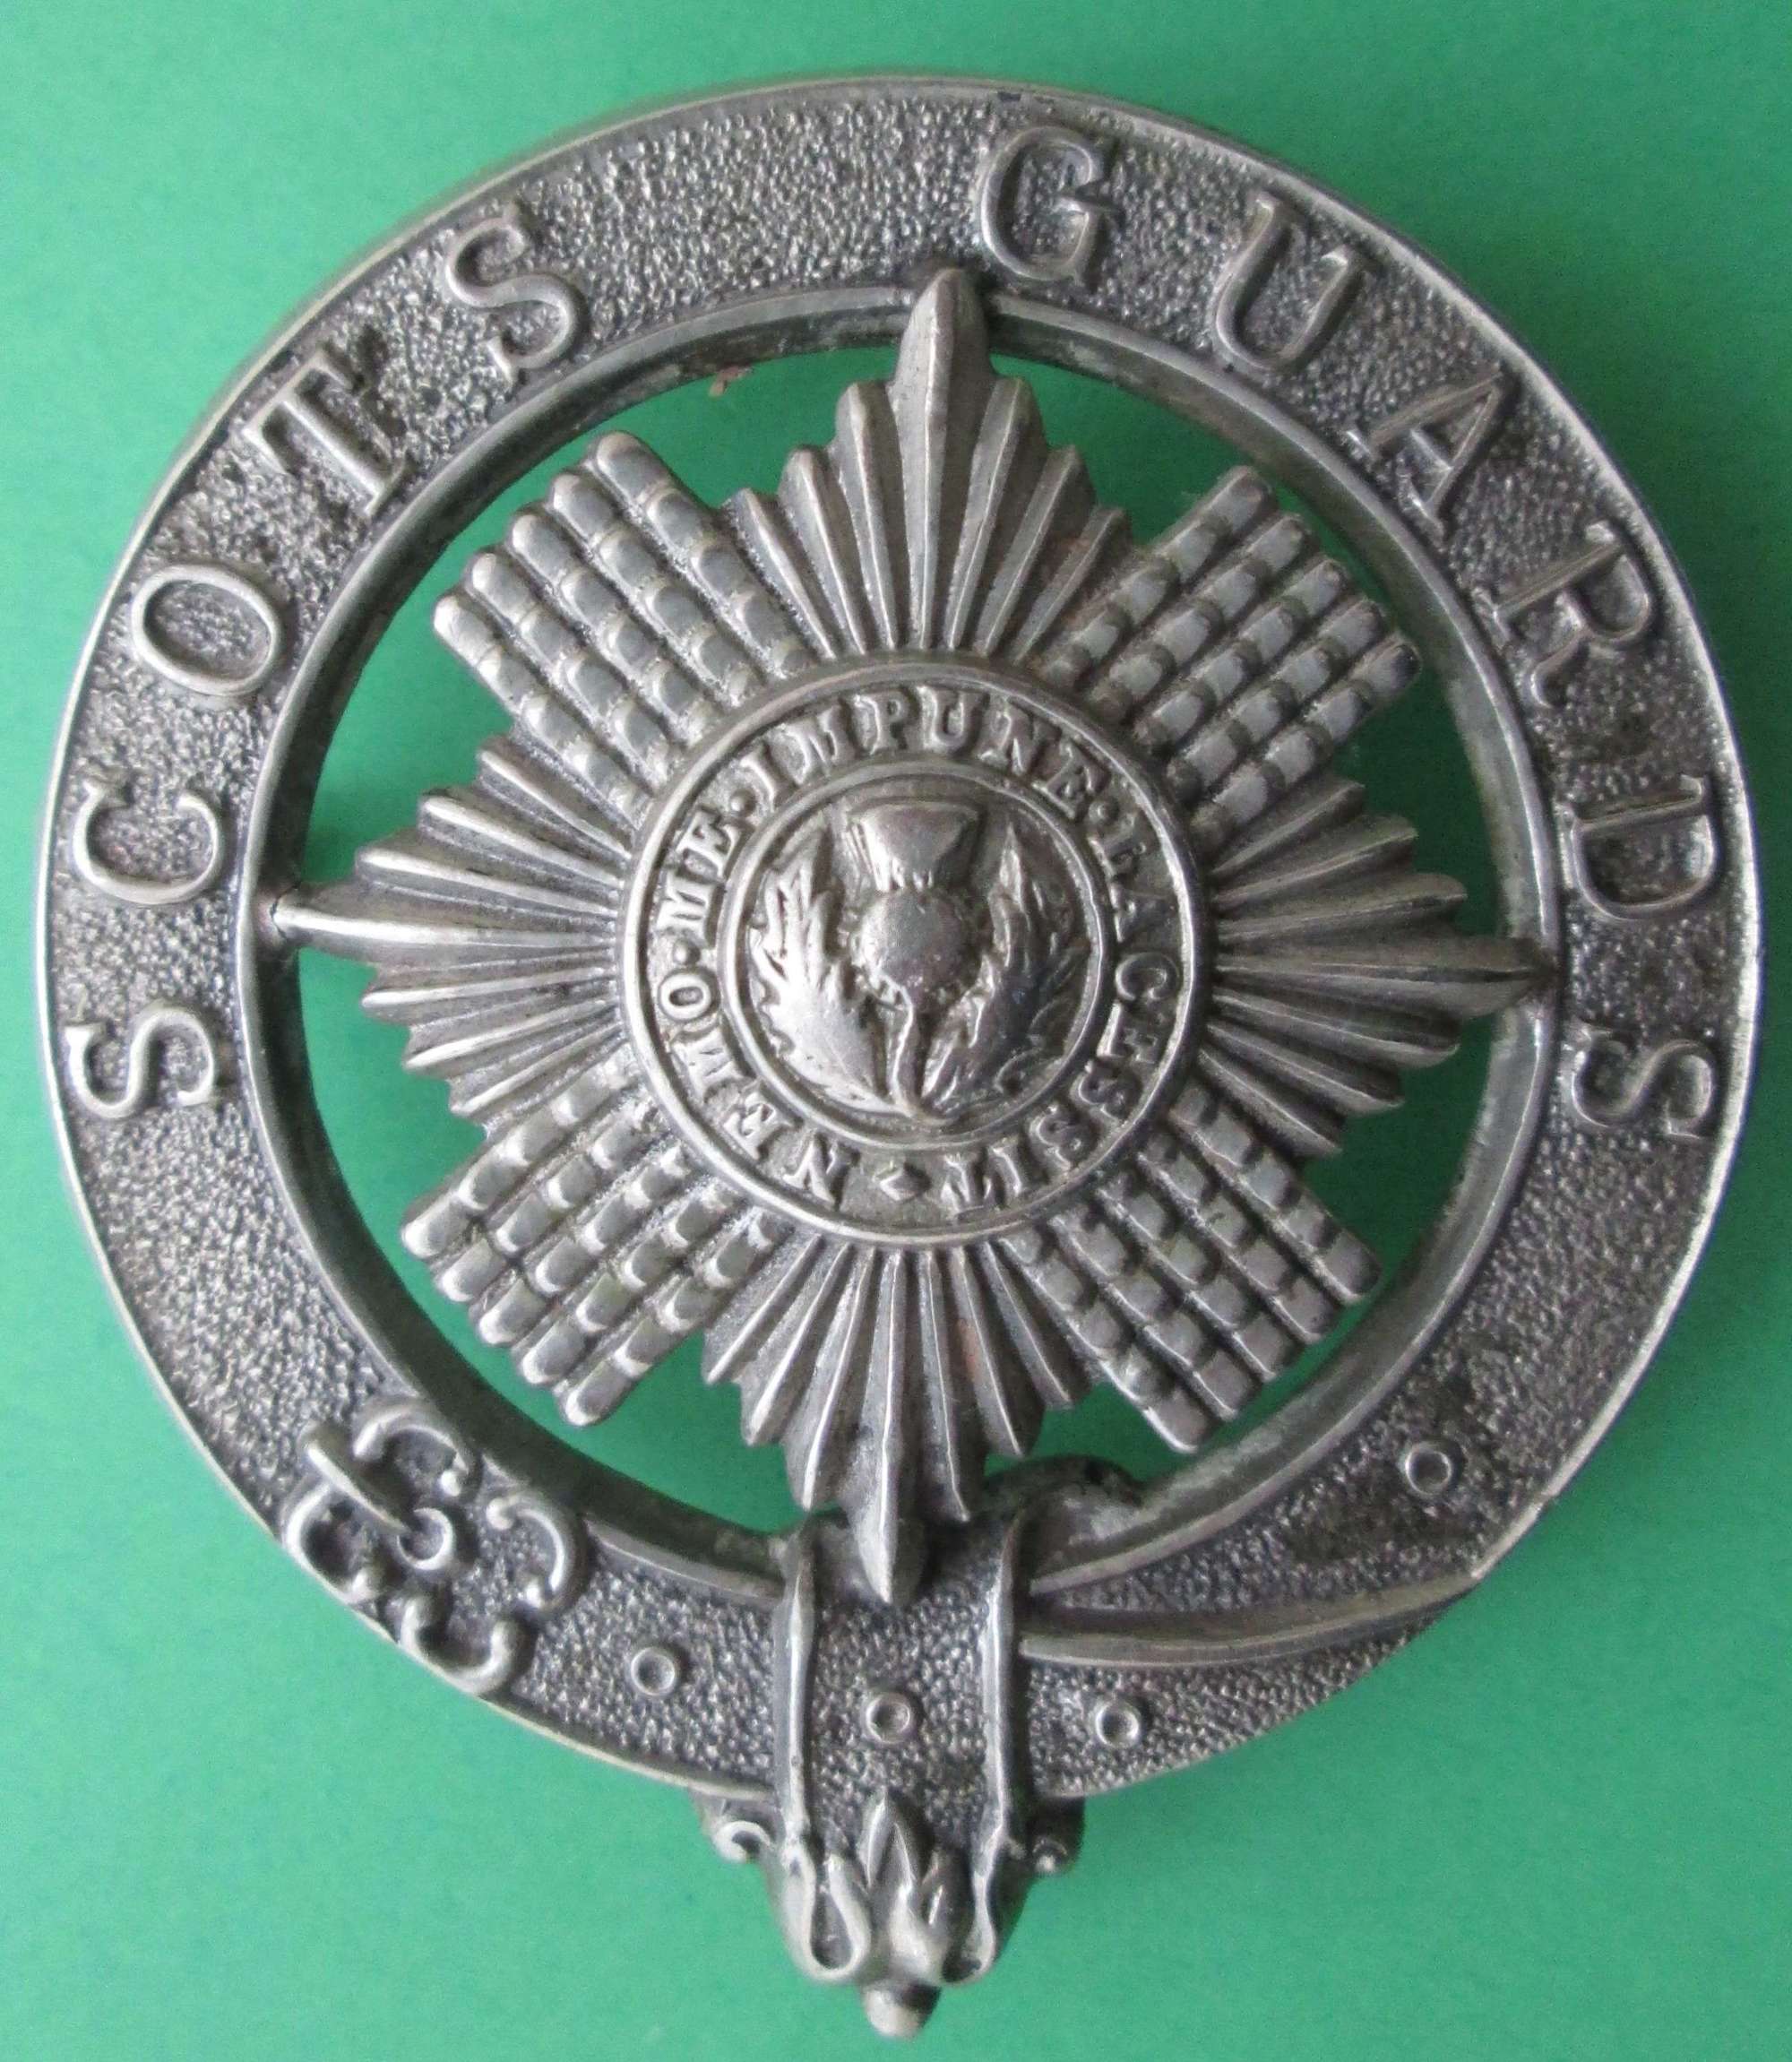 A SCOTS GUARDS PIPERS BADGE